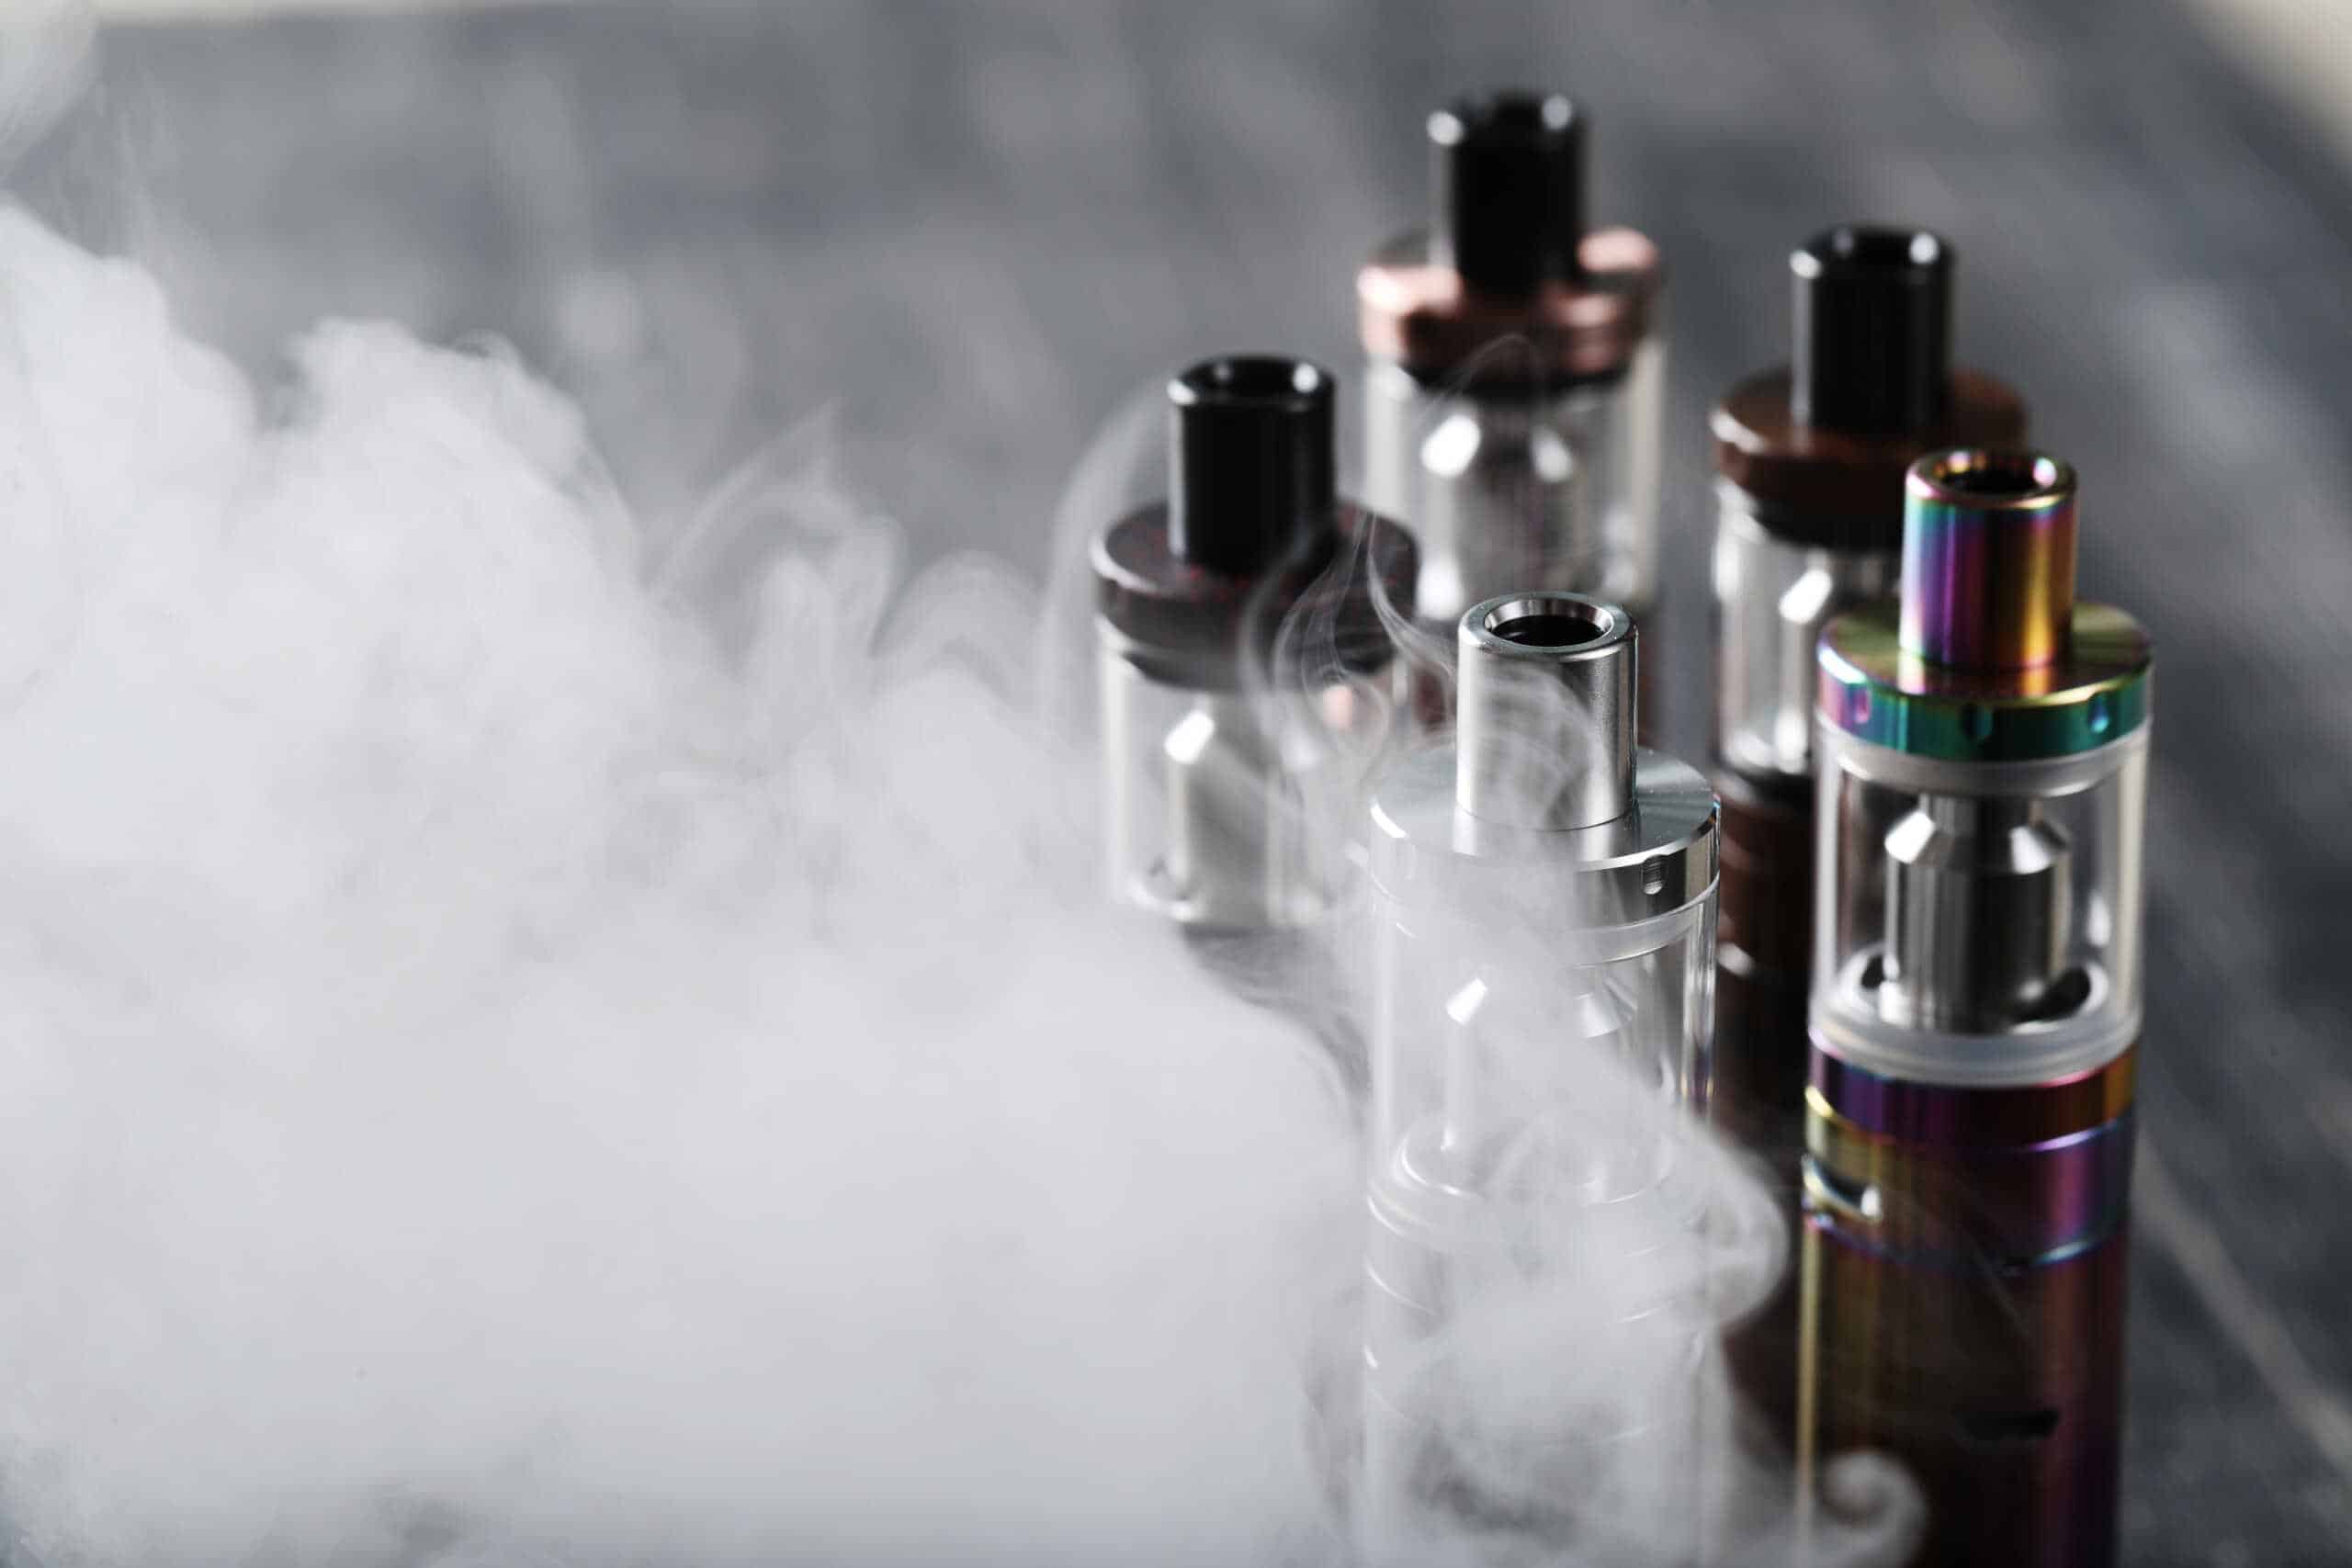 Quitting vaping in early recovery